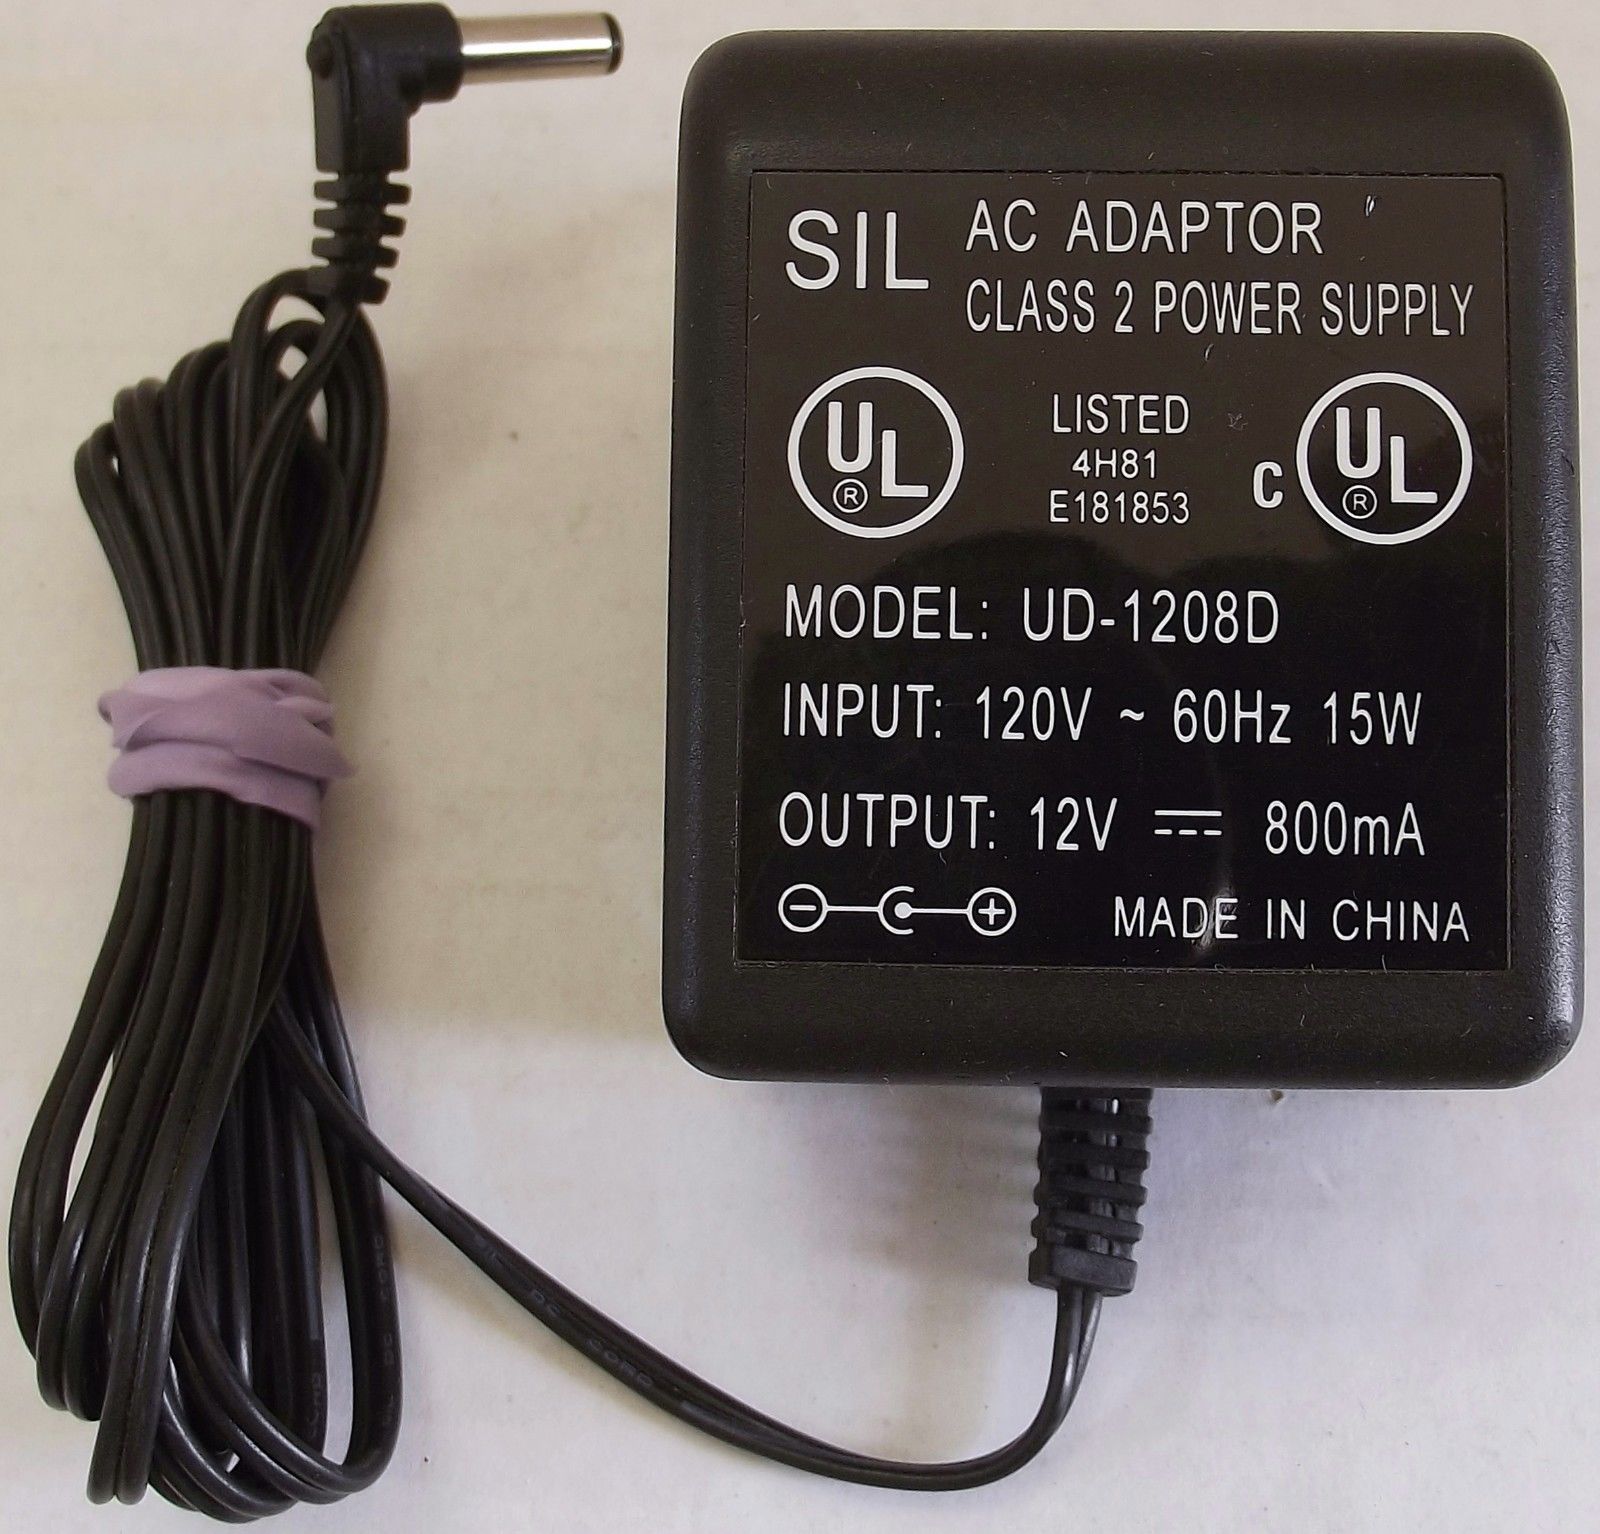 New 12V 800mA SIL UD-1208D Class 2 Transformer Power Supply Ac Adapter